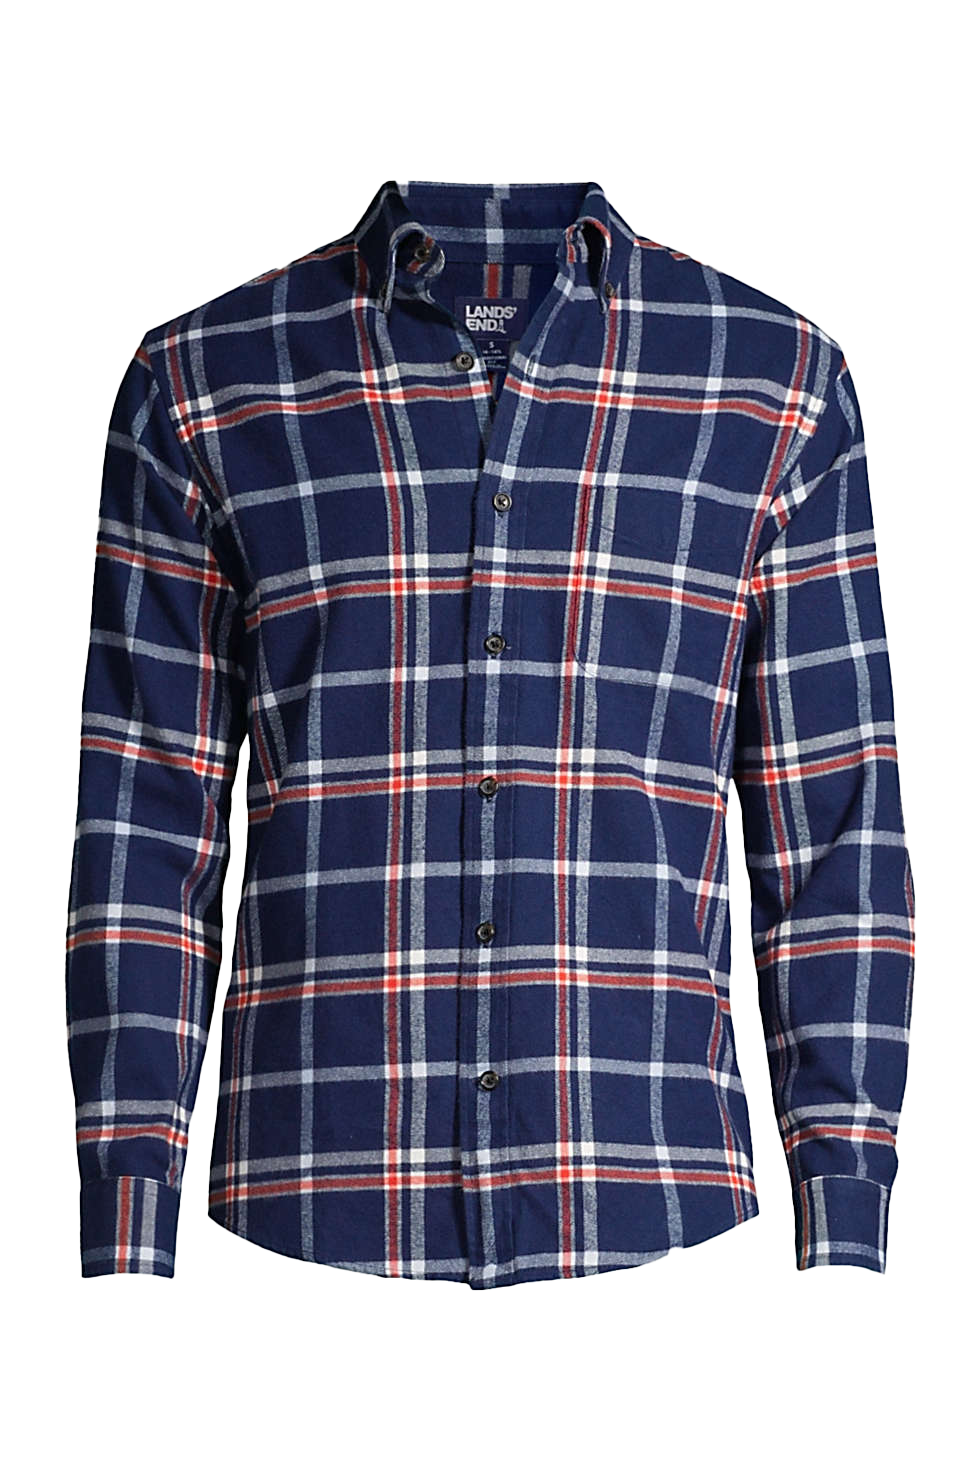 Lands'End Traditional Fit Pattern Flagship Flannel